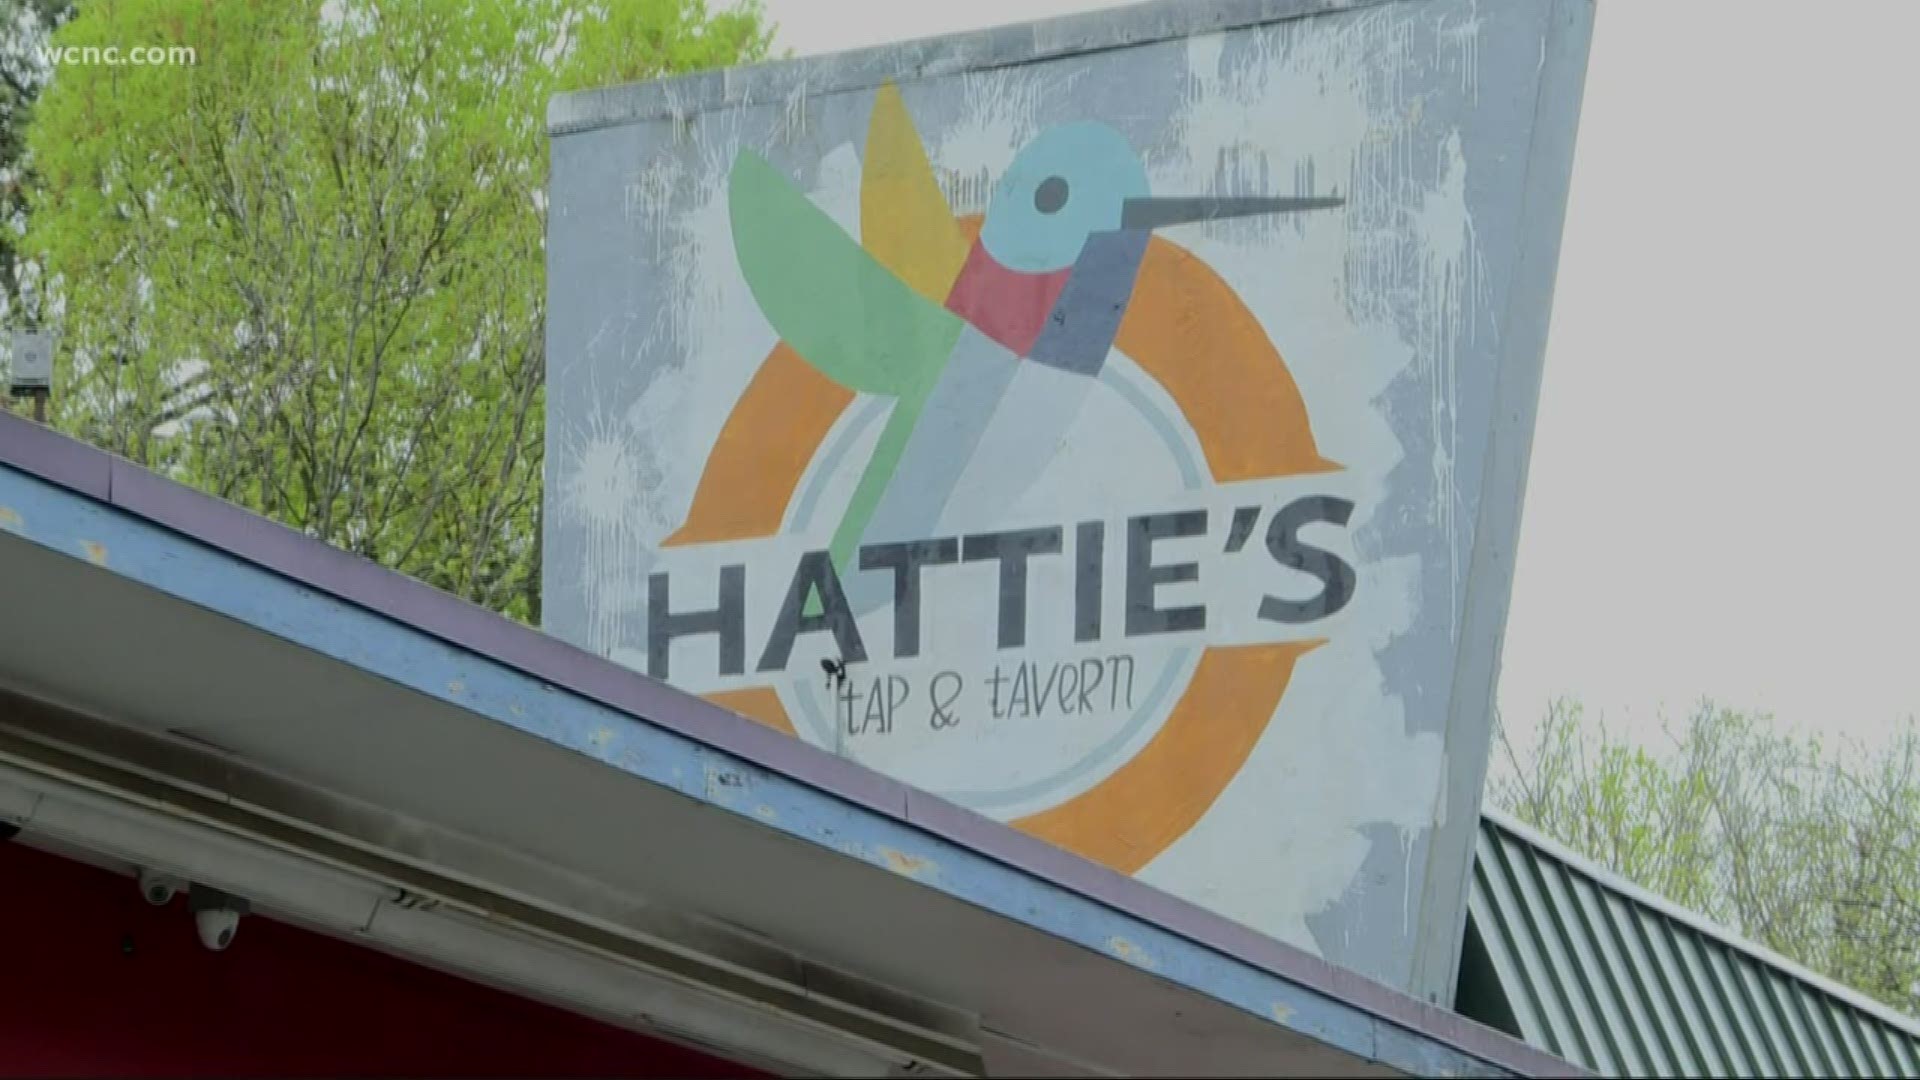 Hattie’s Tap & Tavern, like many other bars, was recently forced to close their doors, but that didn’t stop a suspected thief from breaking in and stealing.